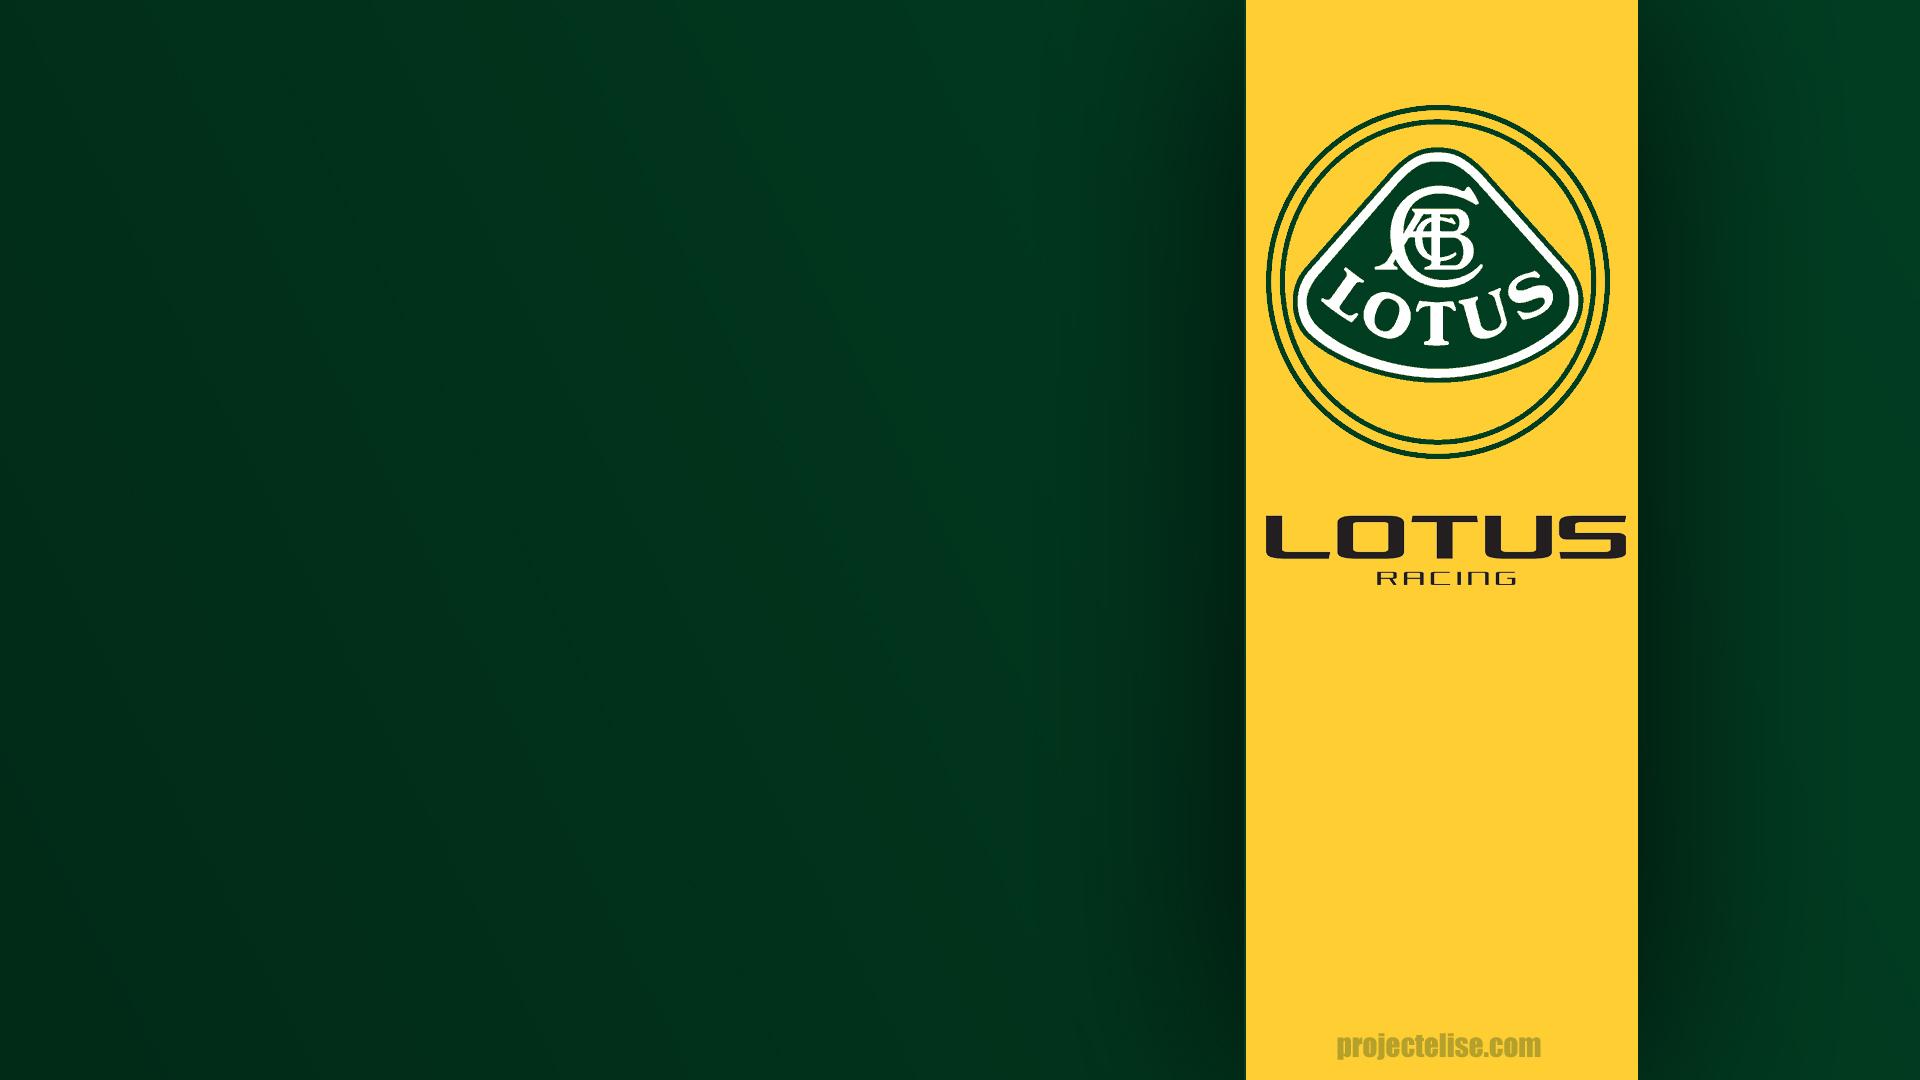 Lotus reveals rebrand with new logo for the first time since 1989 |  Shropshire Star